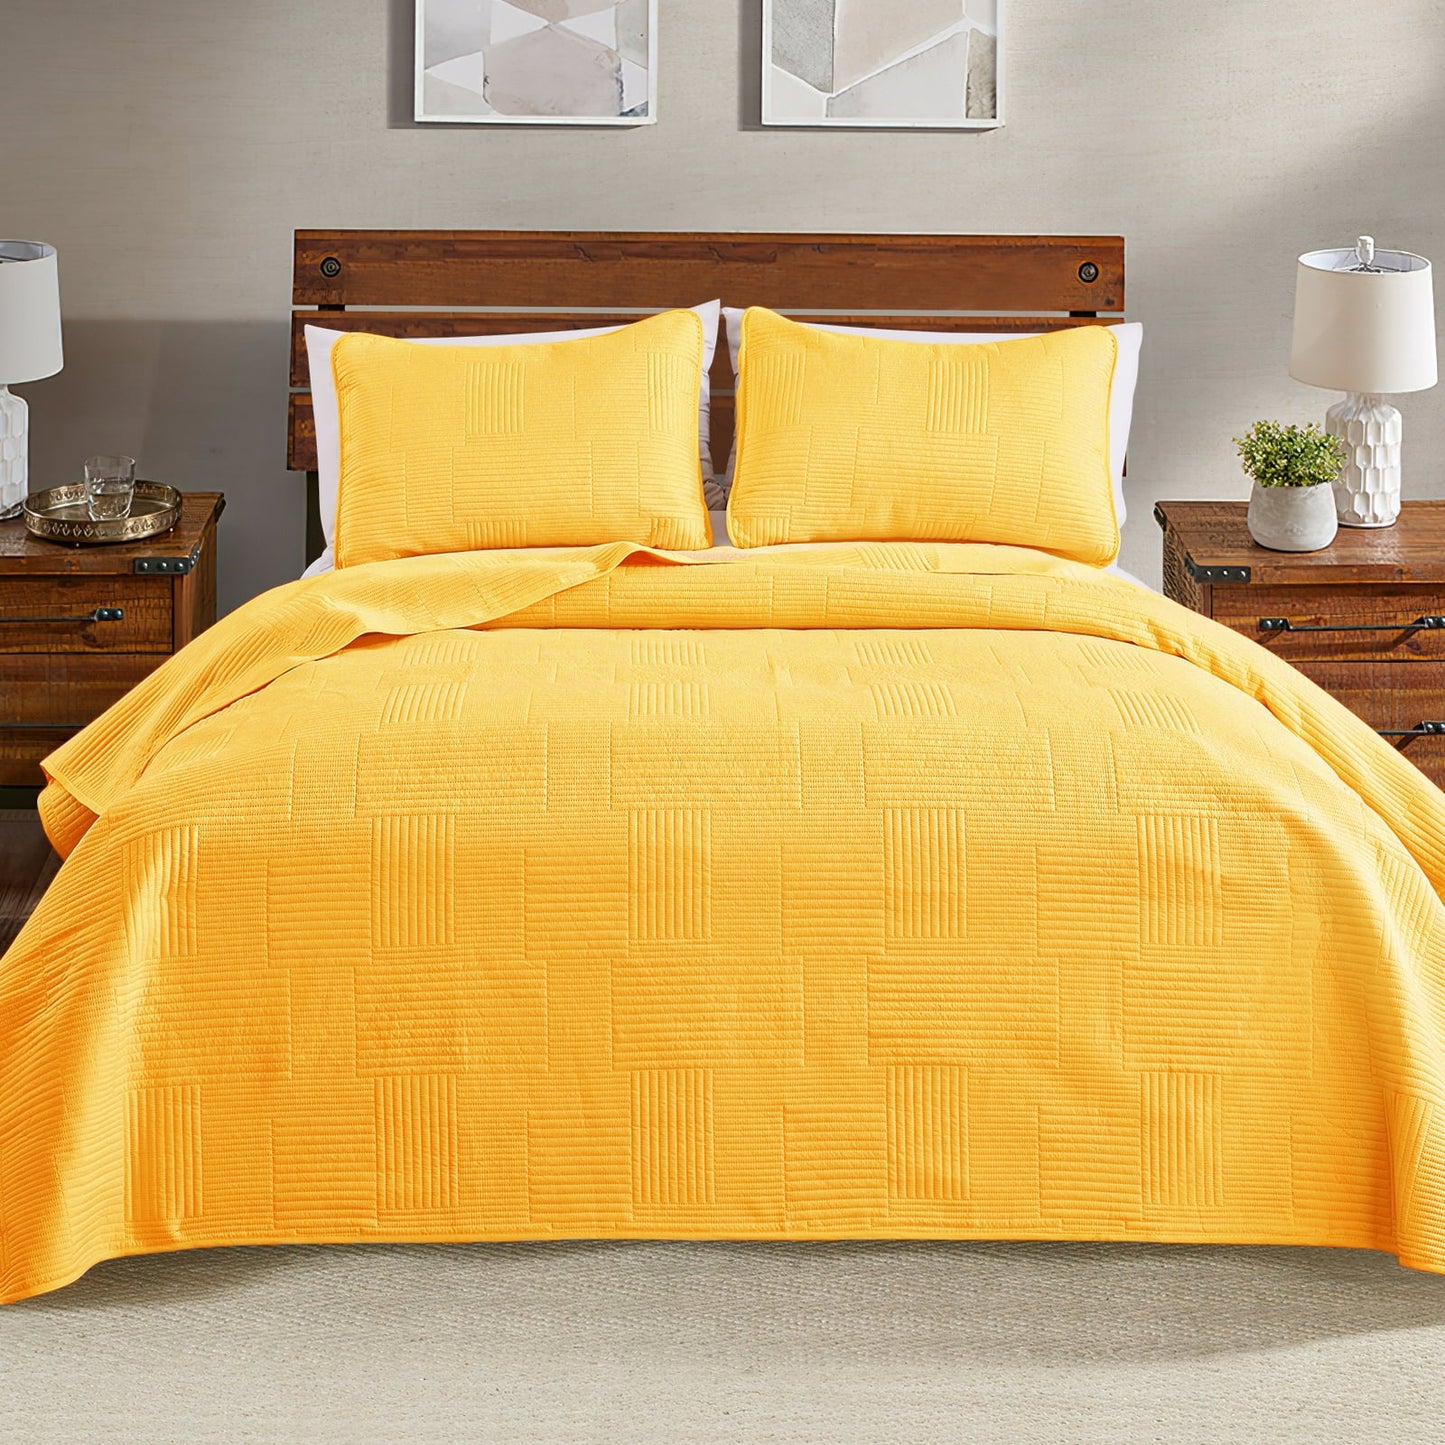 Exclusivo Mezcla King Quilt Set, Soft and Lightweight Bedspreads Coverlet with Striped Pattern, Bedding Sets with 2 Pillow Shams, Reversible Bed Cover for All Seasons, 96x104 Inches，Yellow Grid